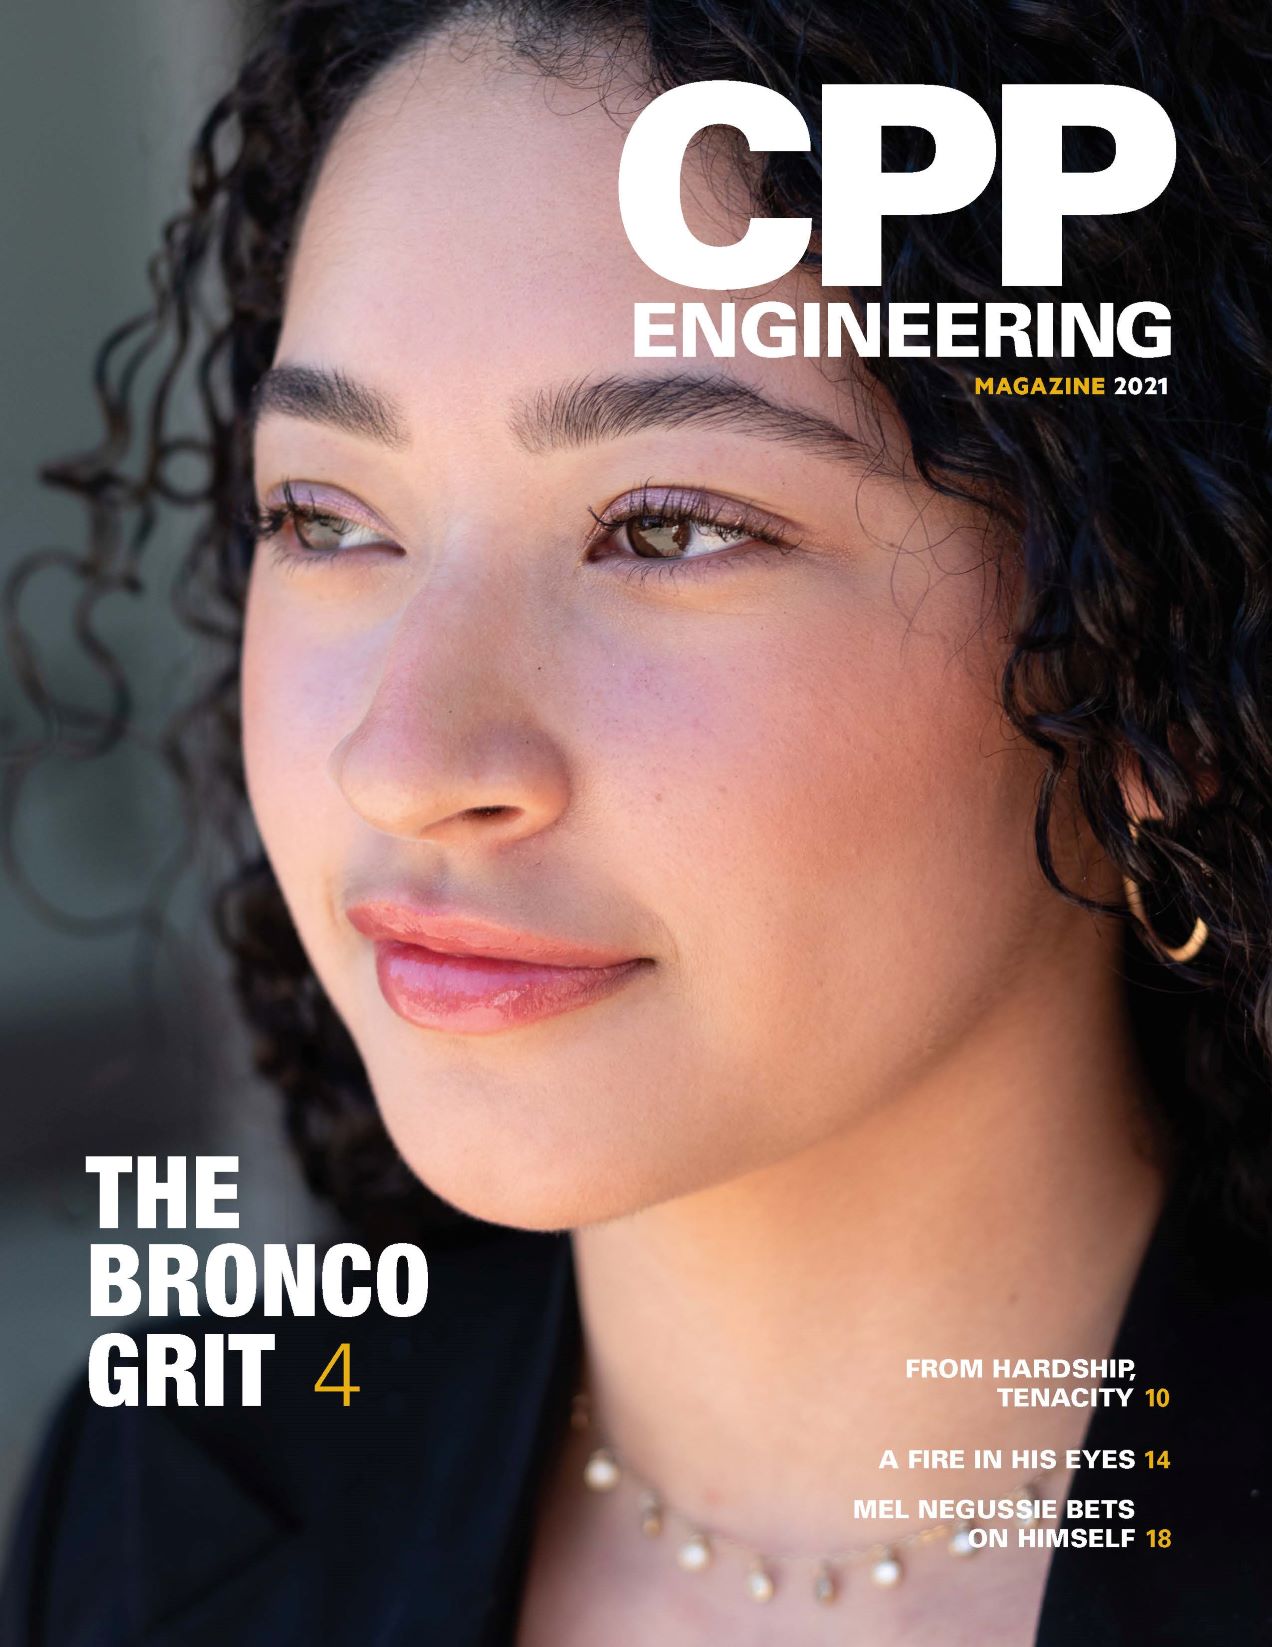 CPP engineering magazine cover that has a profile photograph of a female engineeing student. Title of the magazine is CPP Engineering Magazine Magazine 2021. Story teaser text on the cover: The Bronco Grit 4. From Hardship, Tenacity 10; A Fire in His Eyes 14; Mel Negussie Bets on Himself 18